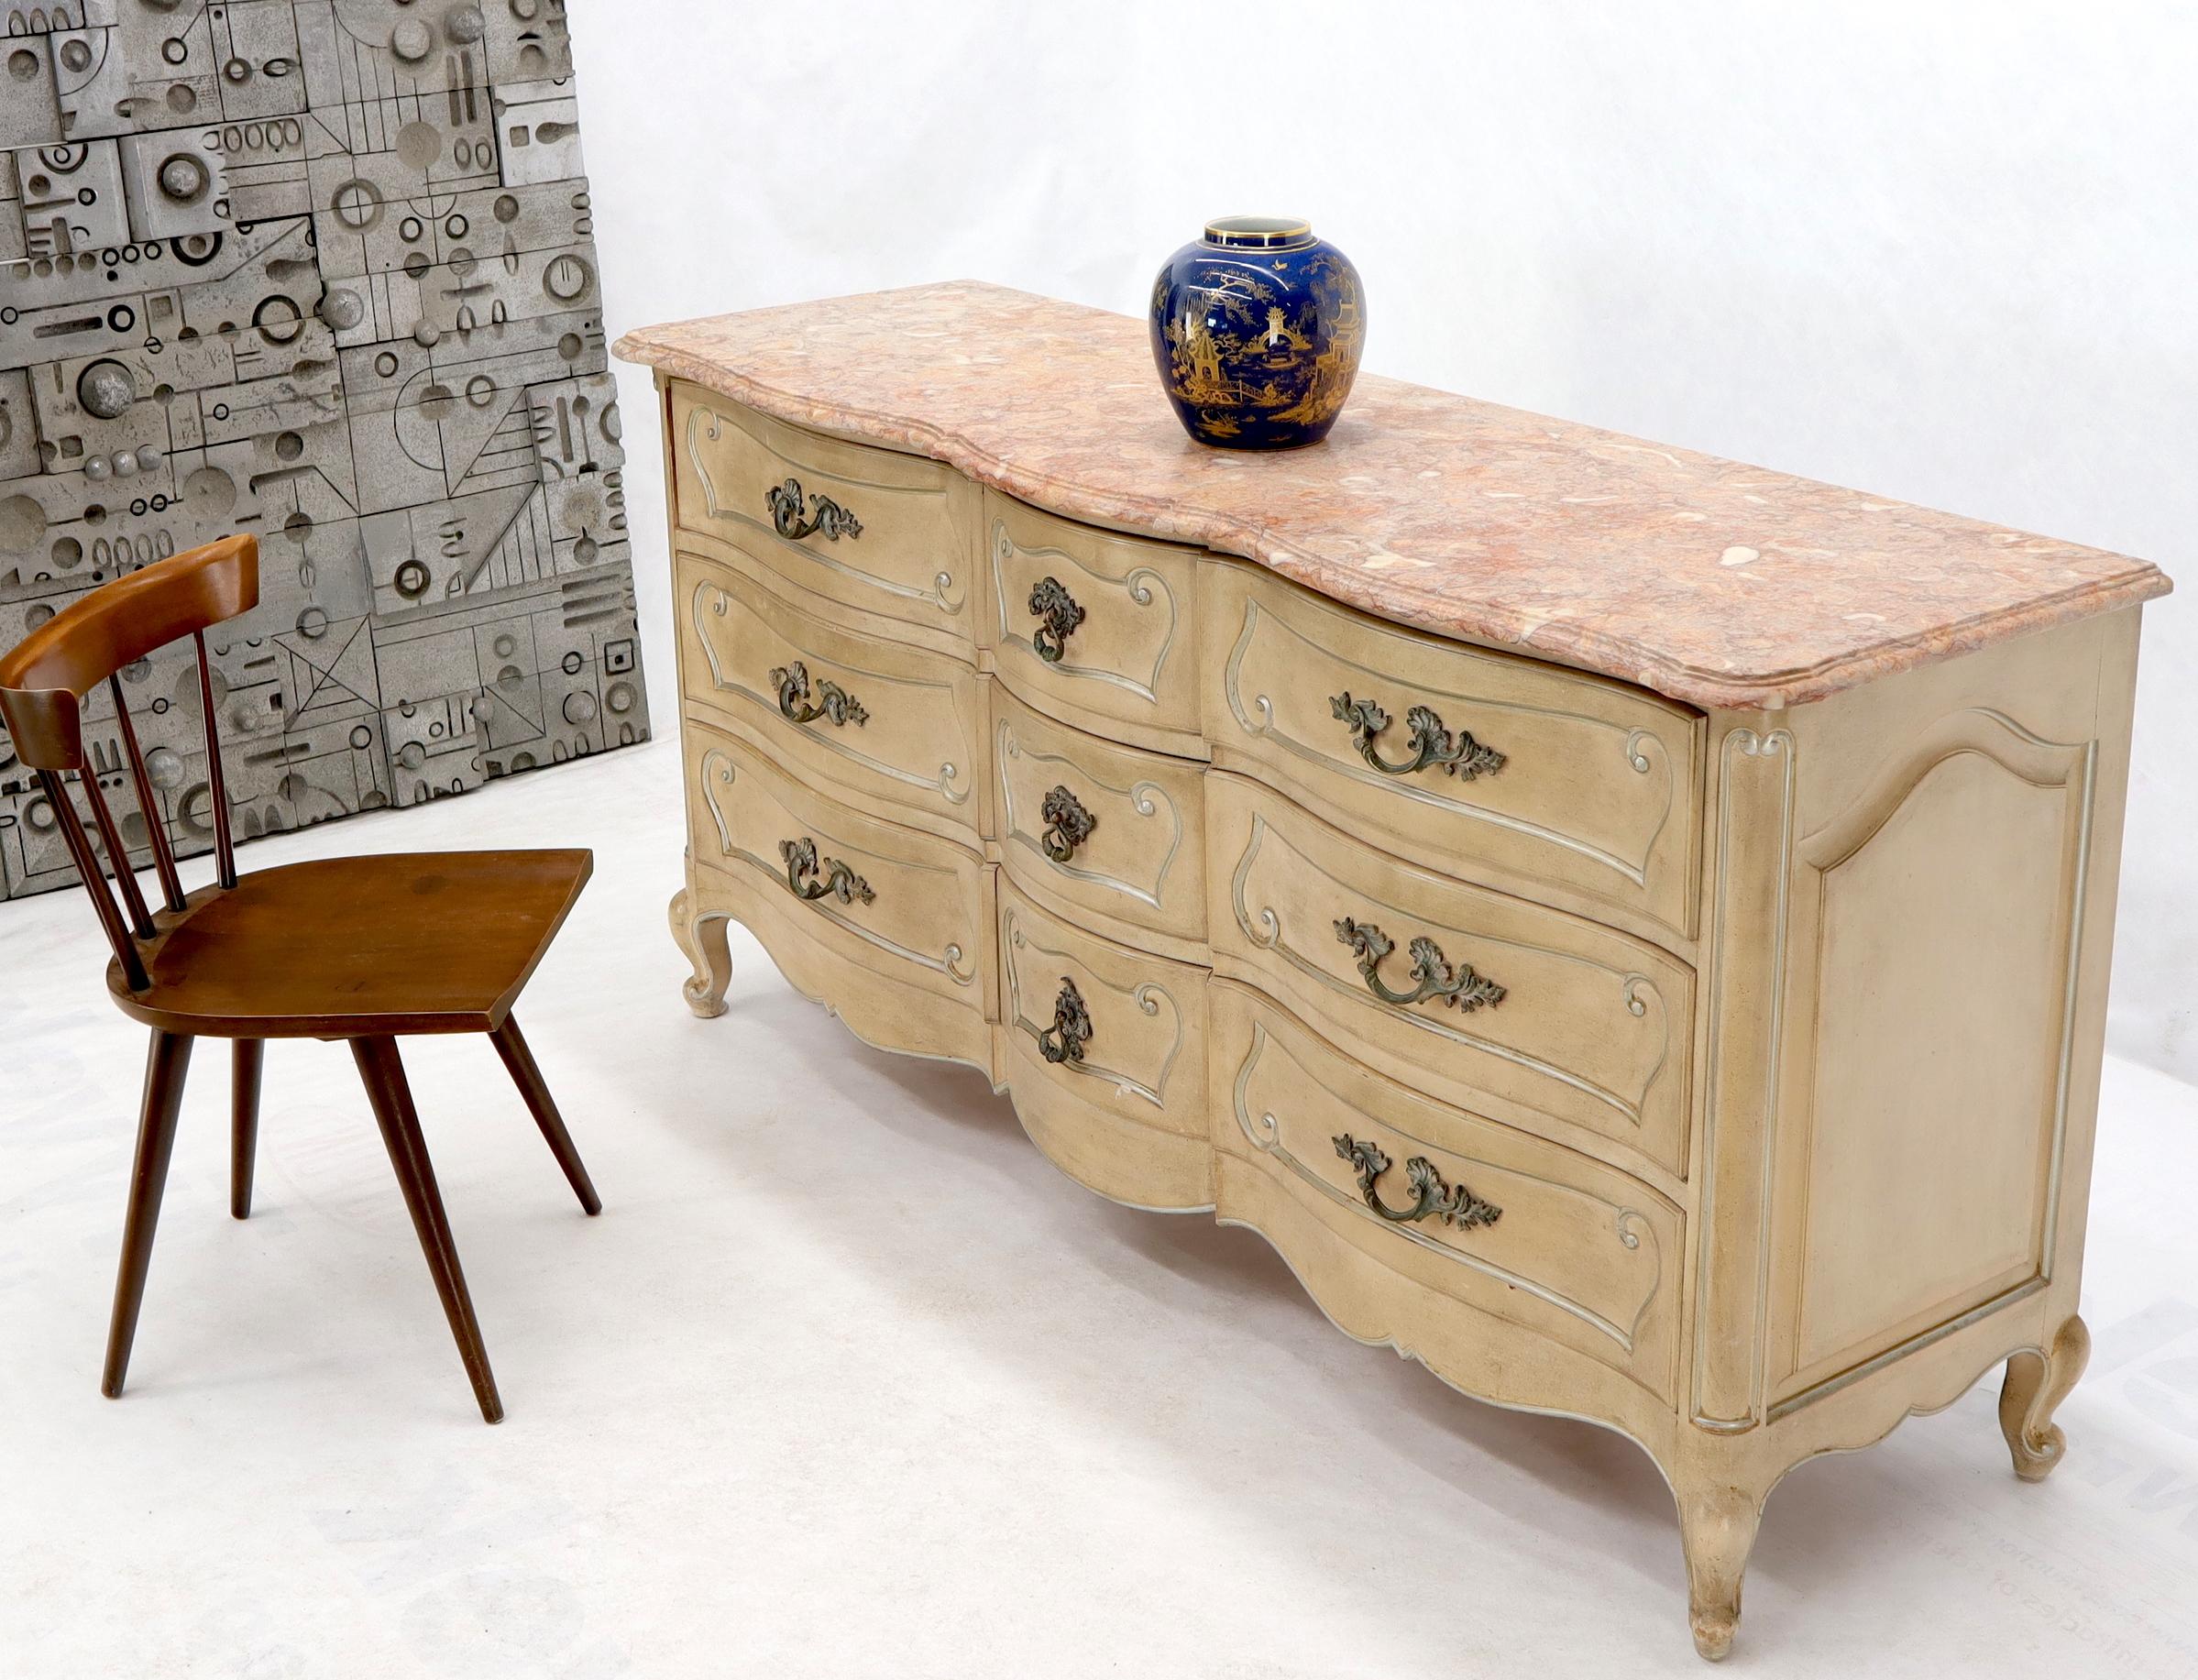 Very fine quality pink marble top French Country 9 drawers dresser with brass hardware.